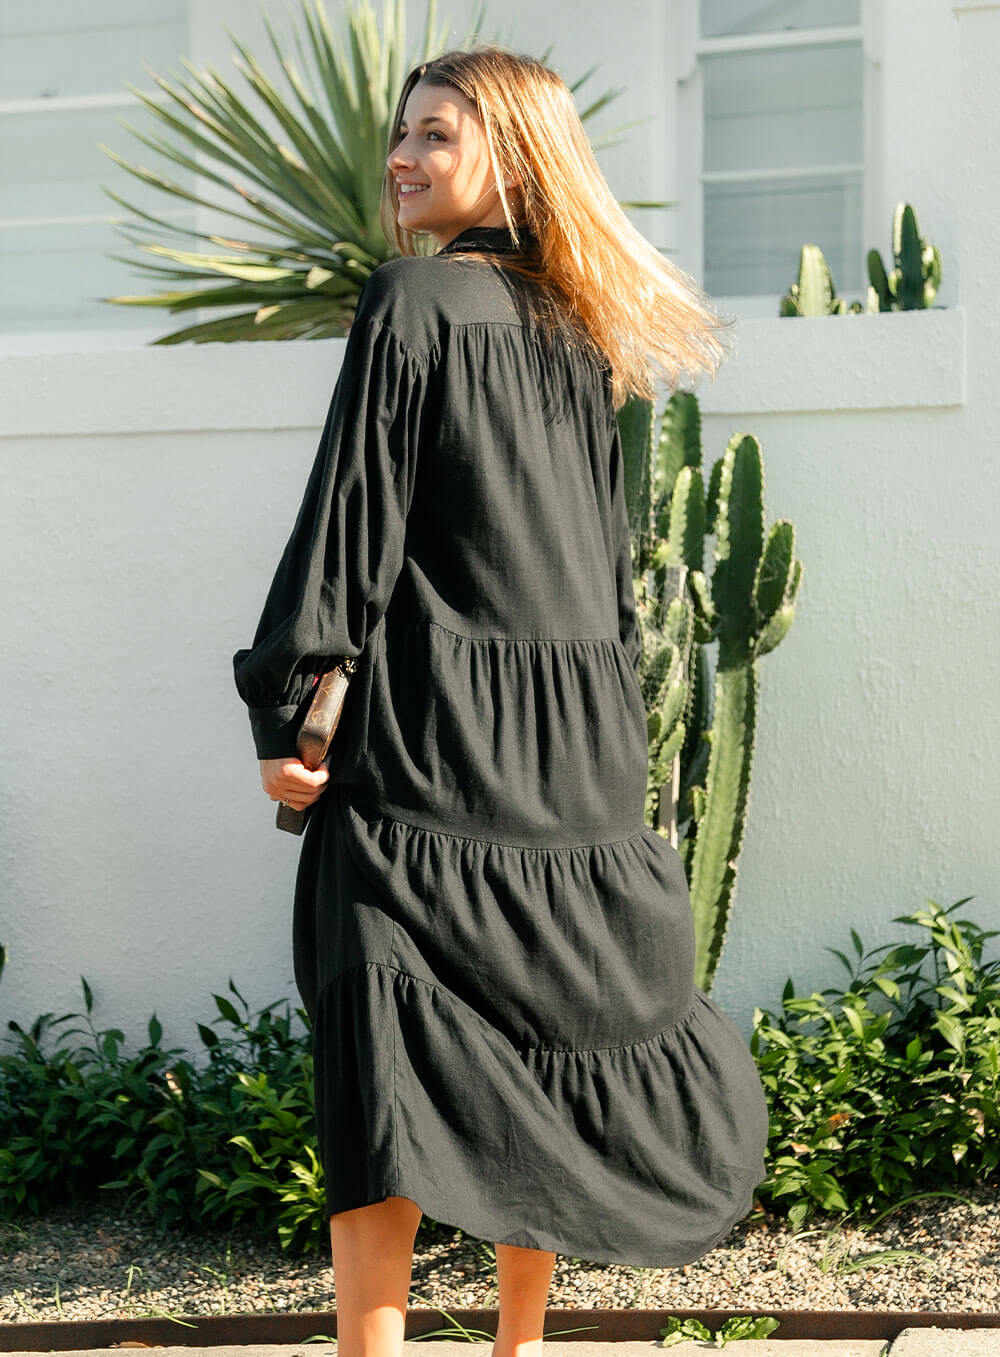 The Daisy Linen Midi Dress in black is made from 100% linen, It's overised layers drape over the body flowing effortlessly.